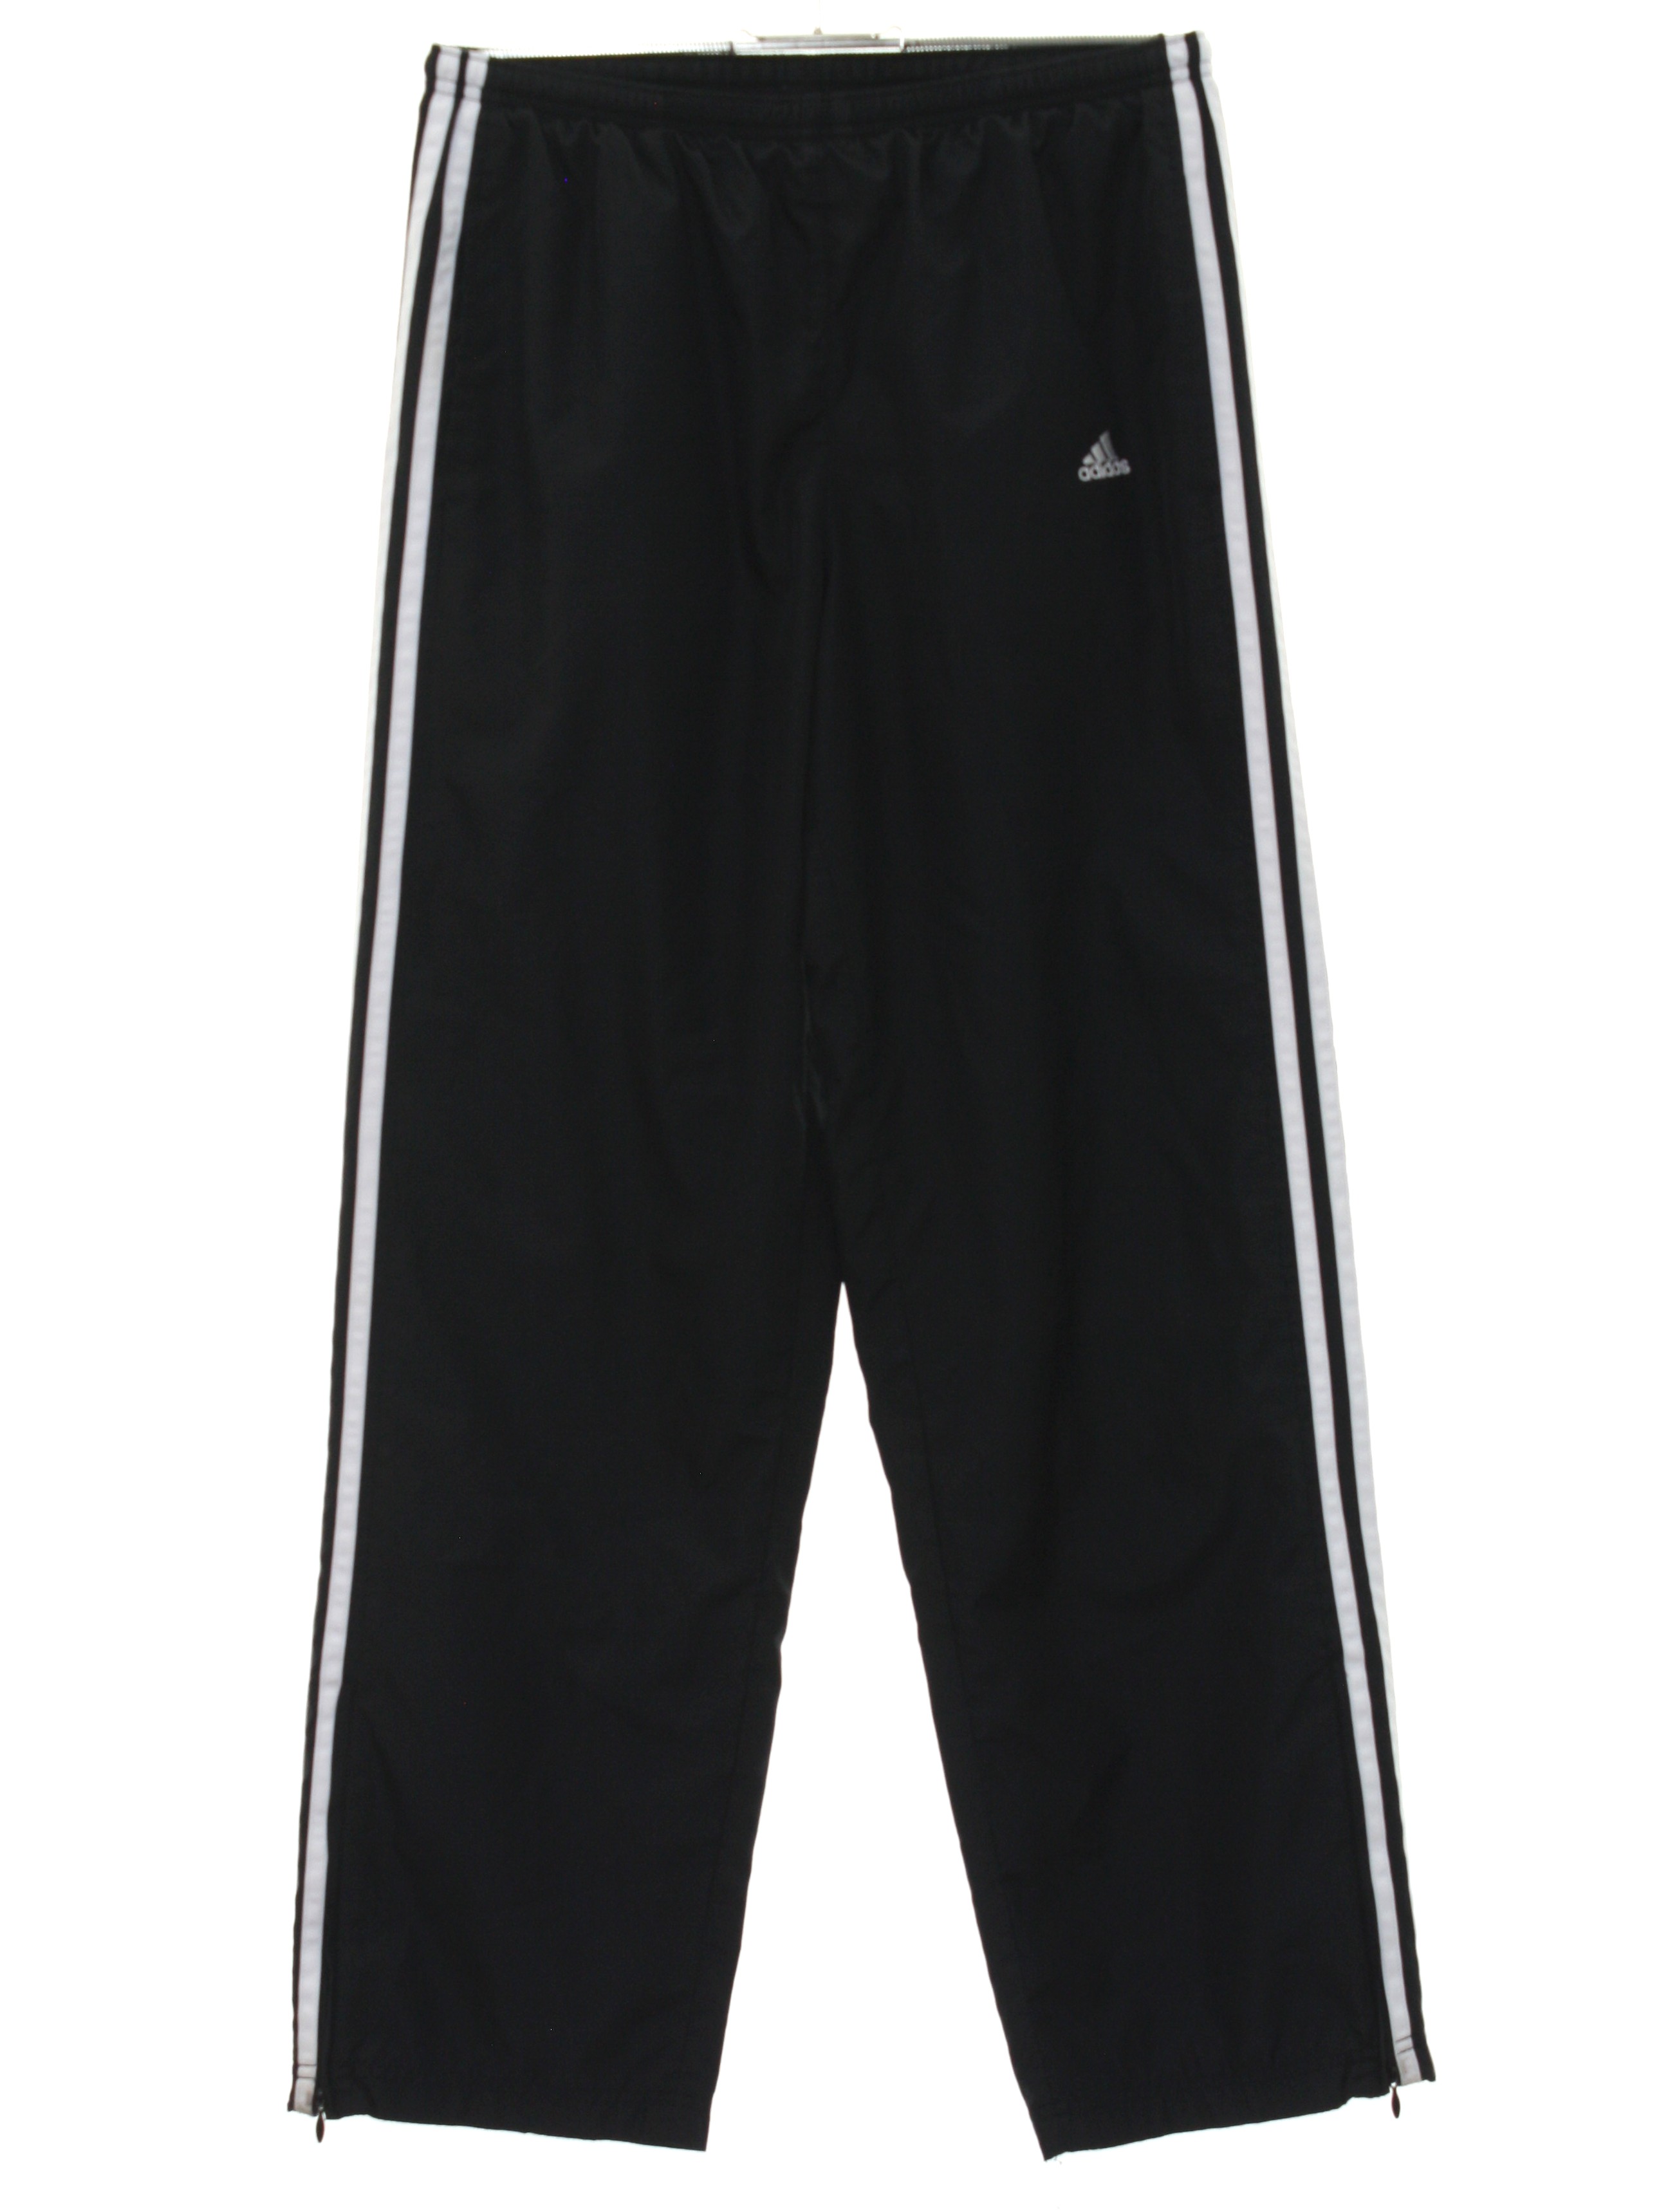 1990's Retro Pants: 90s or newer -Adidas- Mens black solid colored ...